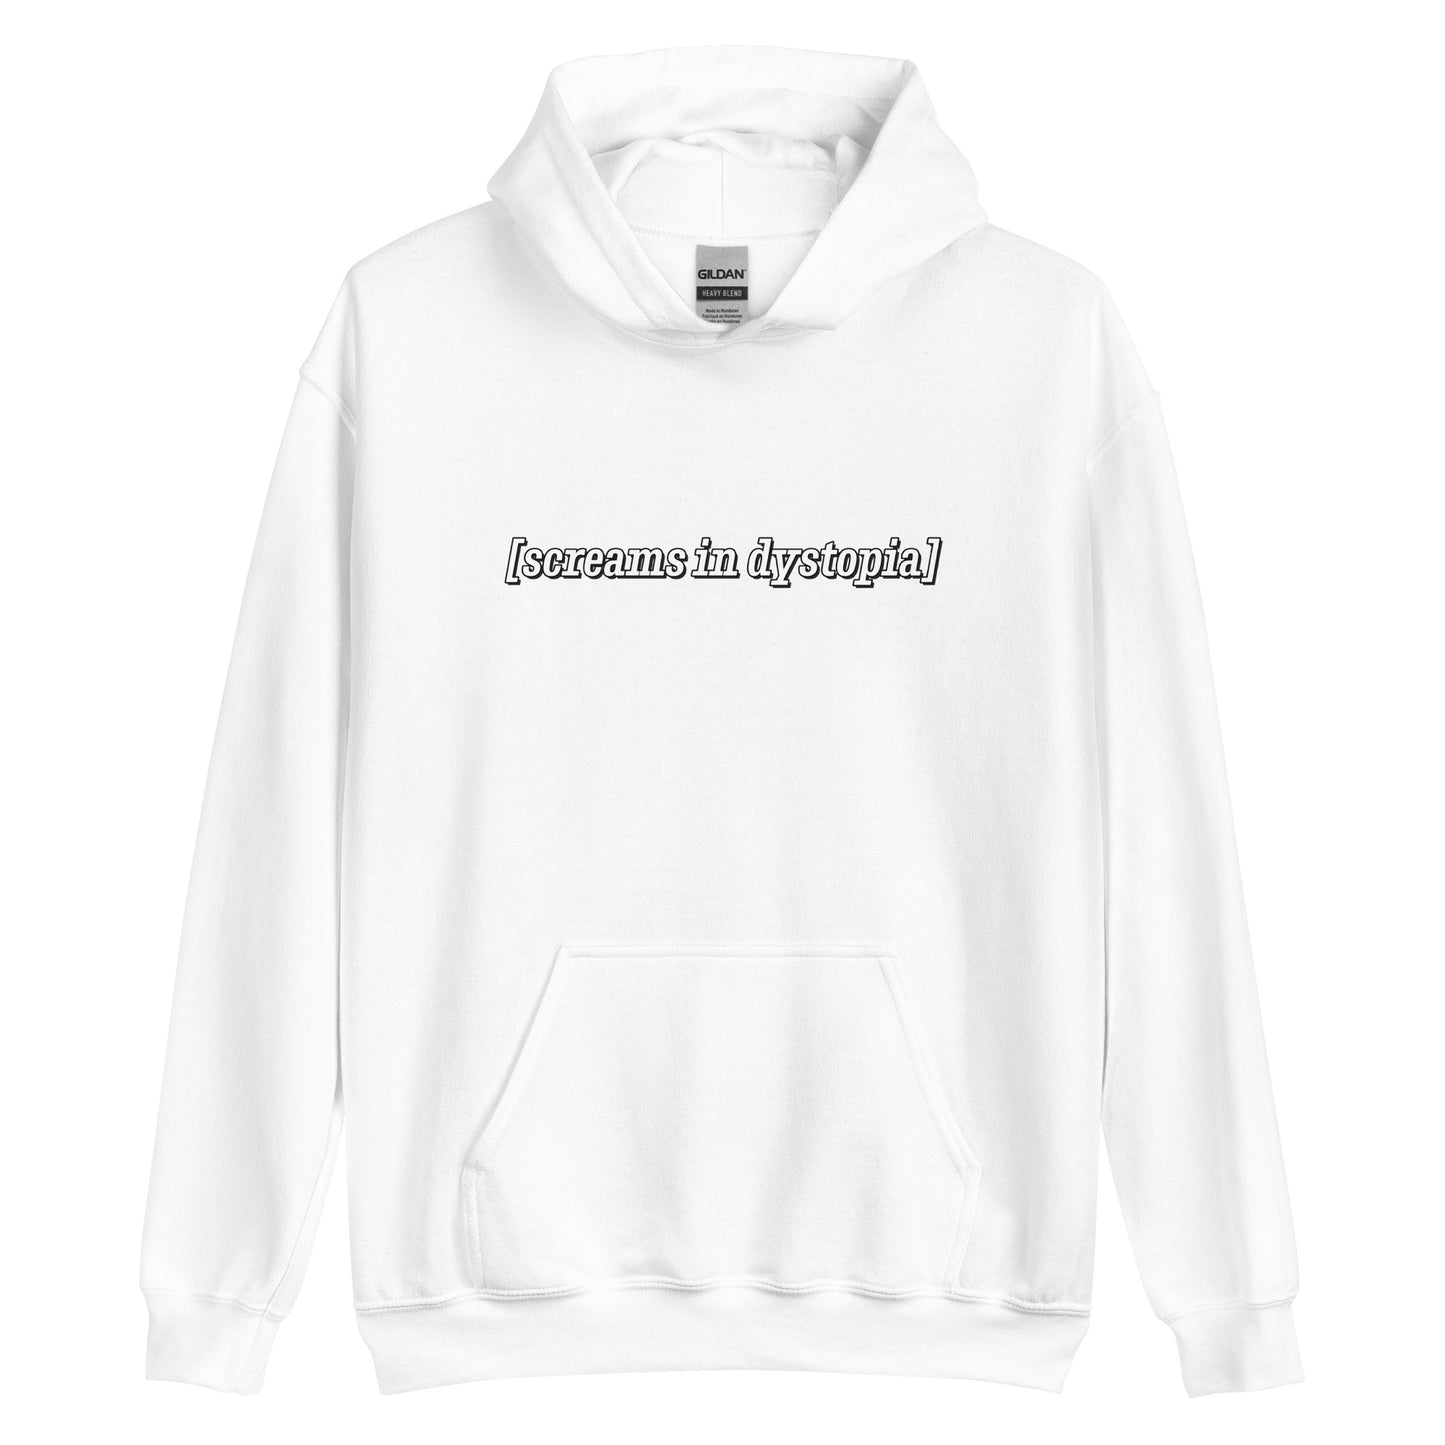 A white hooded sweatshirt with white text in the style of subtitles. The text reads "[screams in dystopia]".